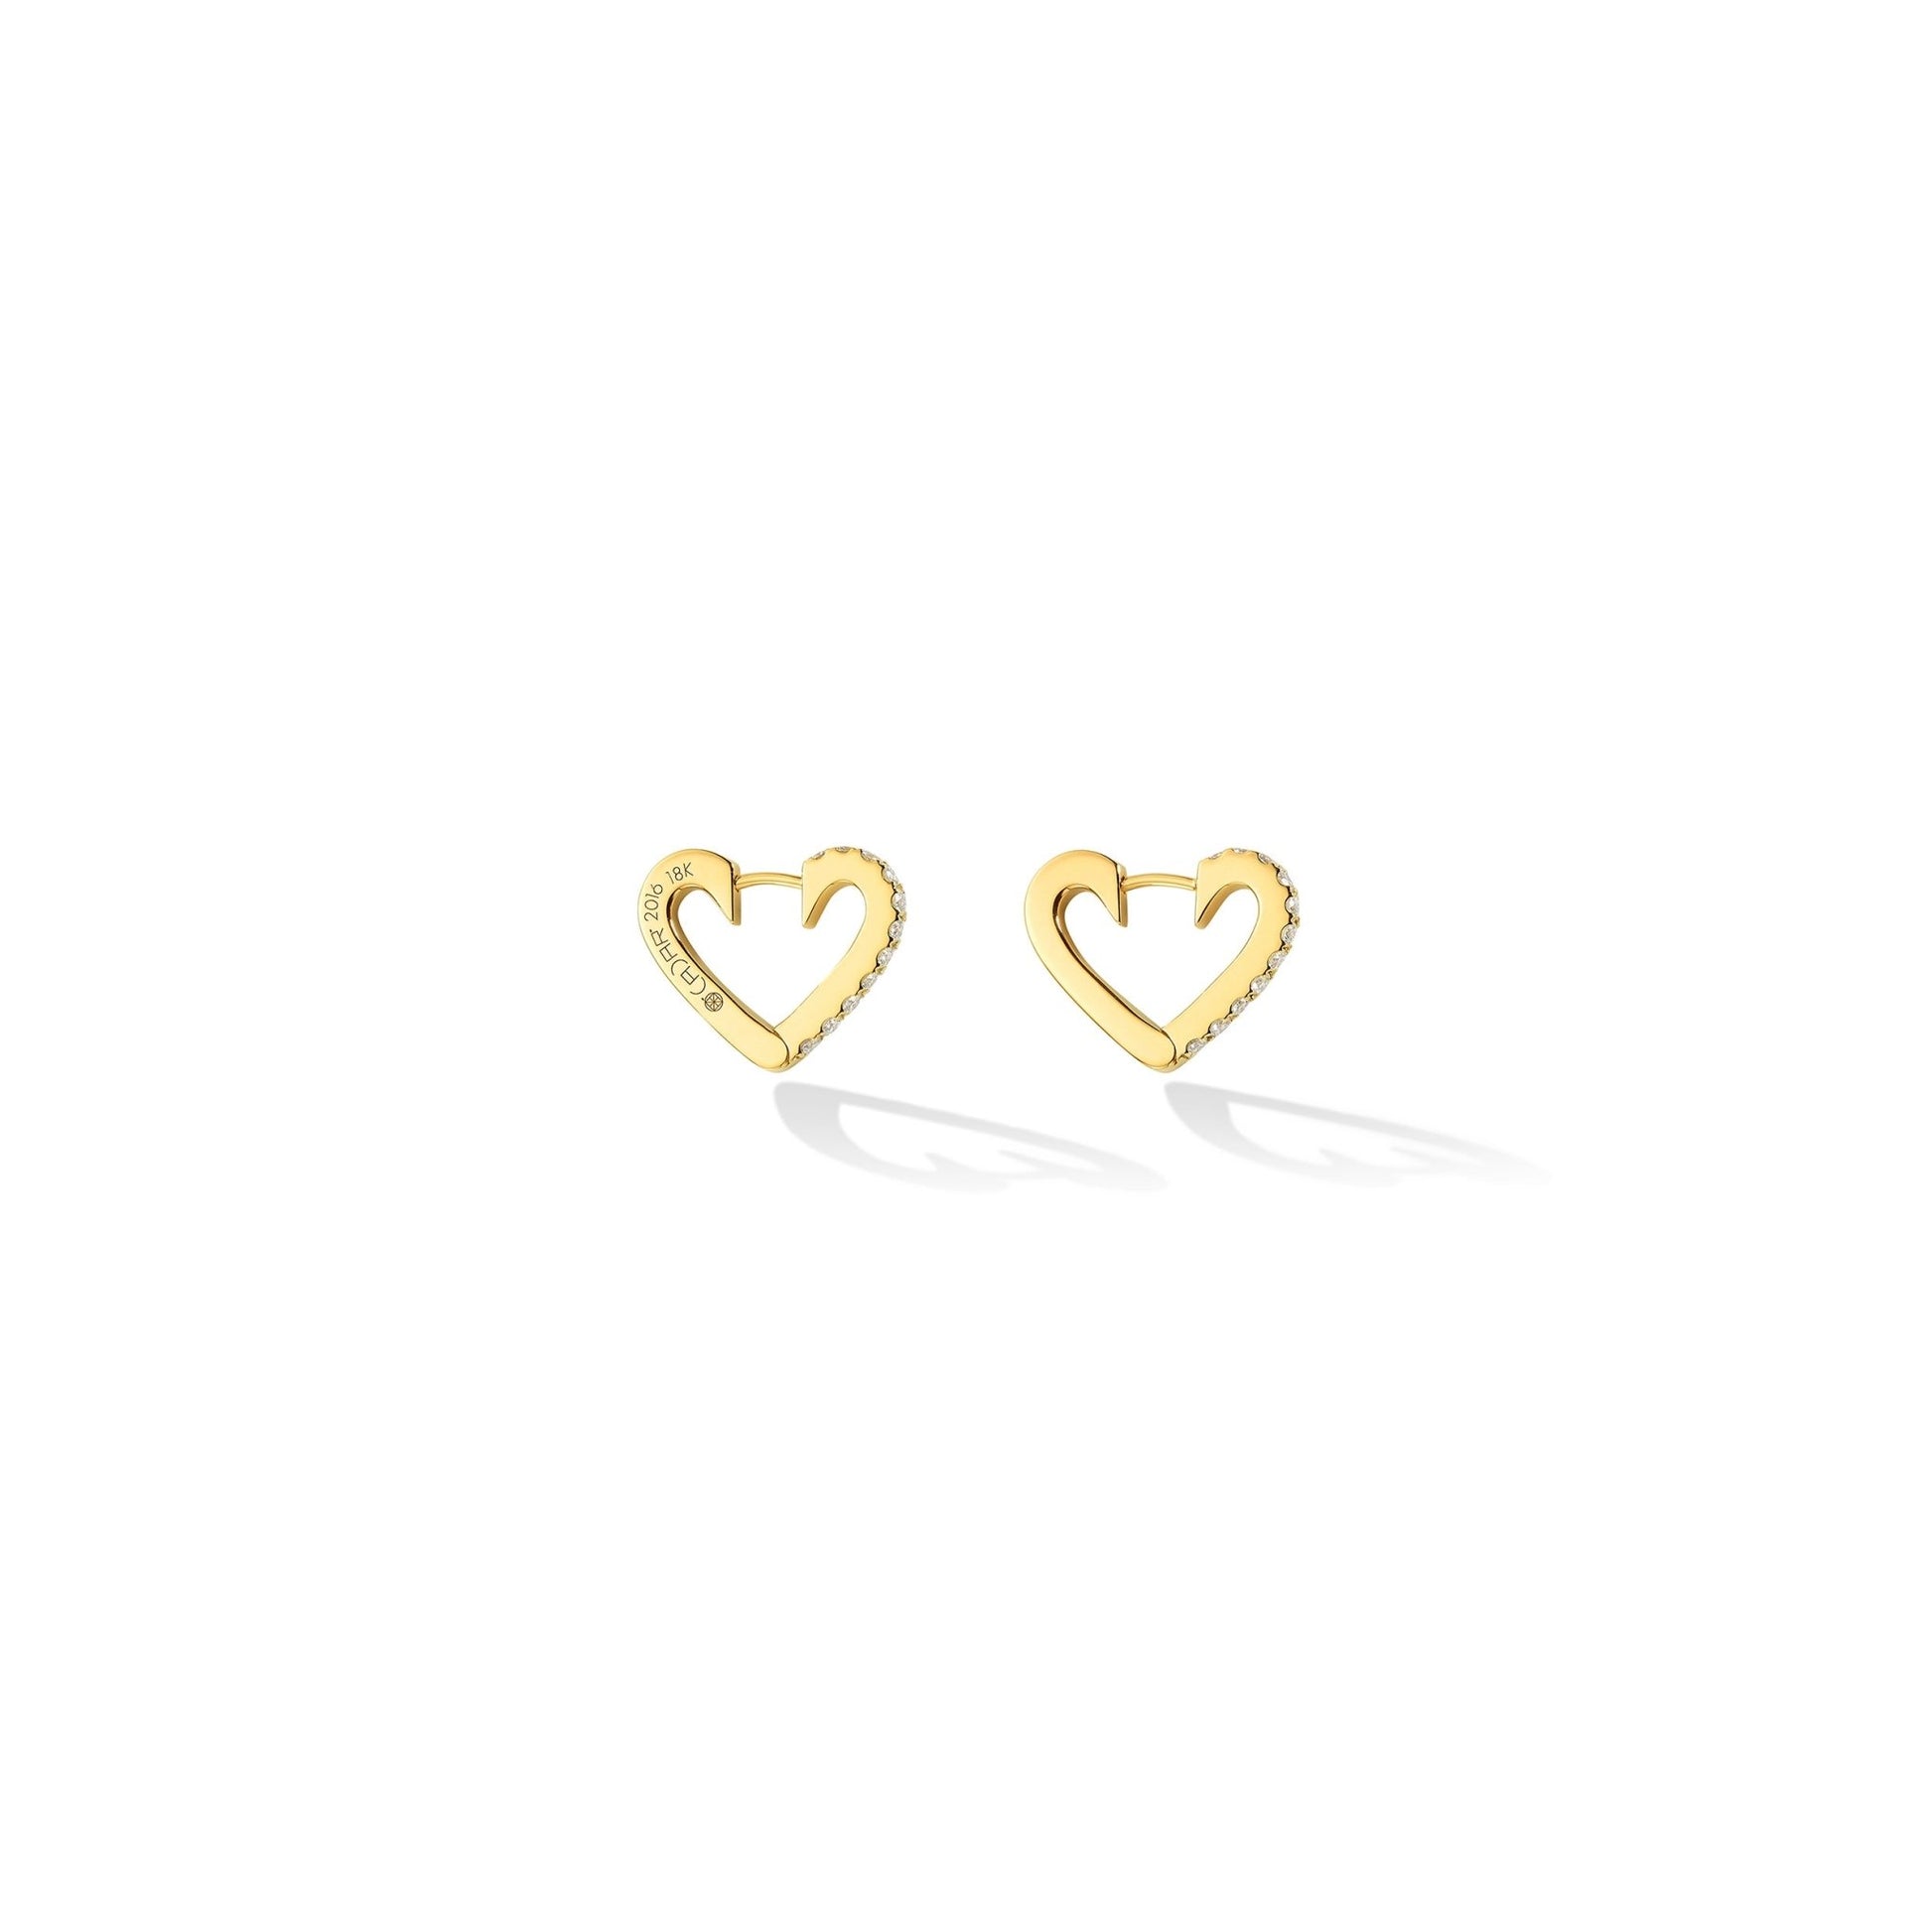 Small Yellow Gold Endless Hoop Earrings with White Diamonds - Cadar